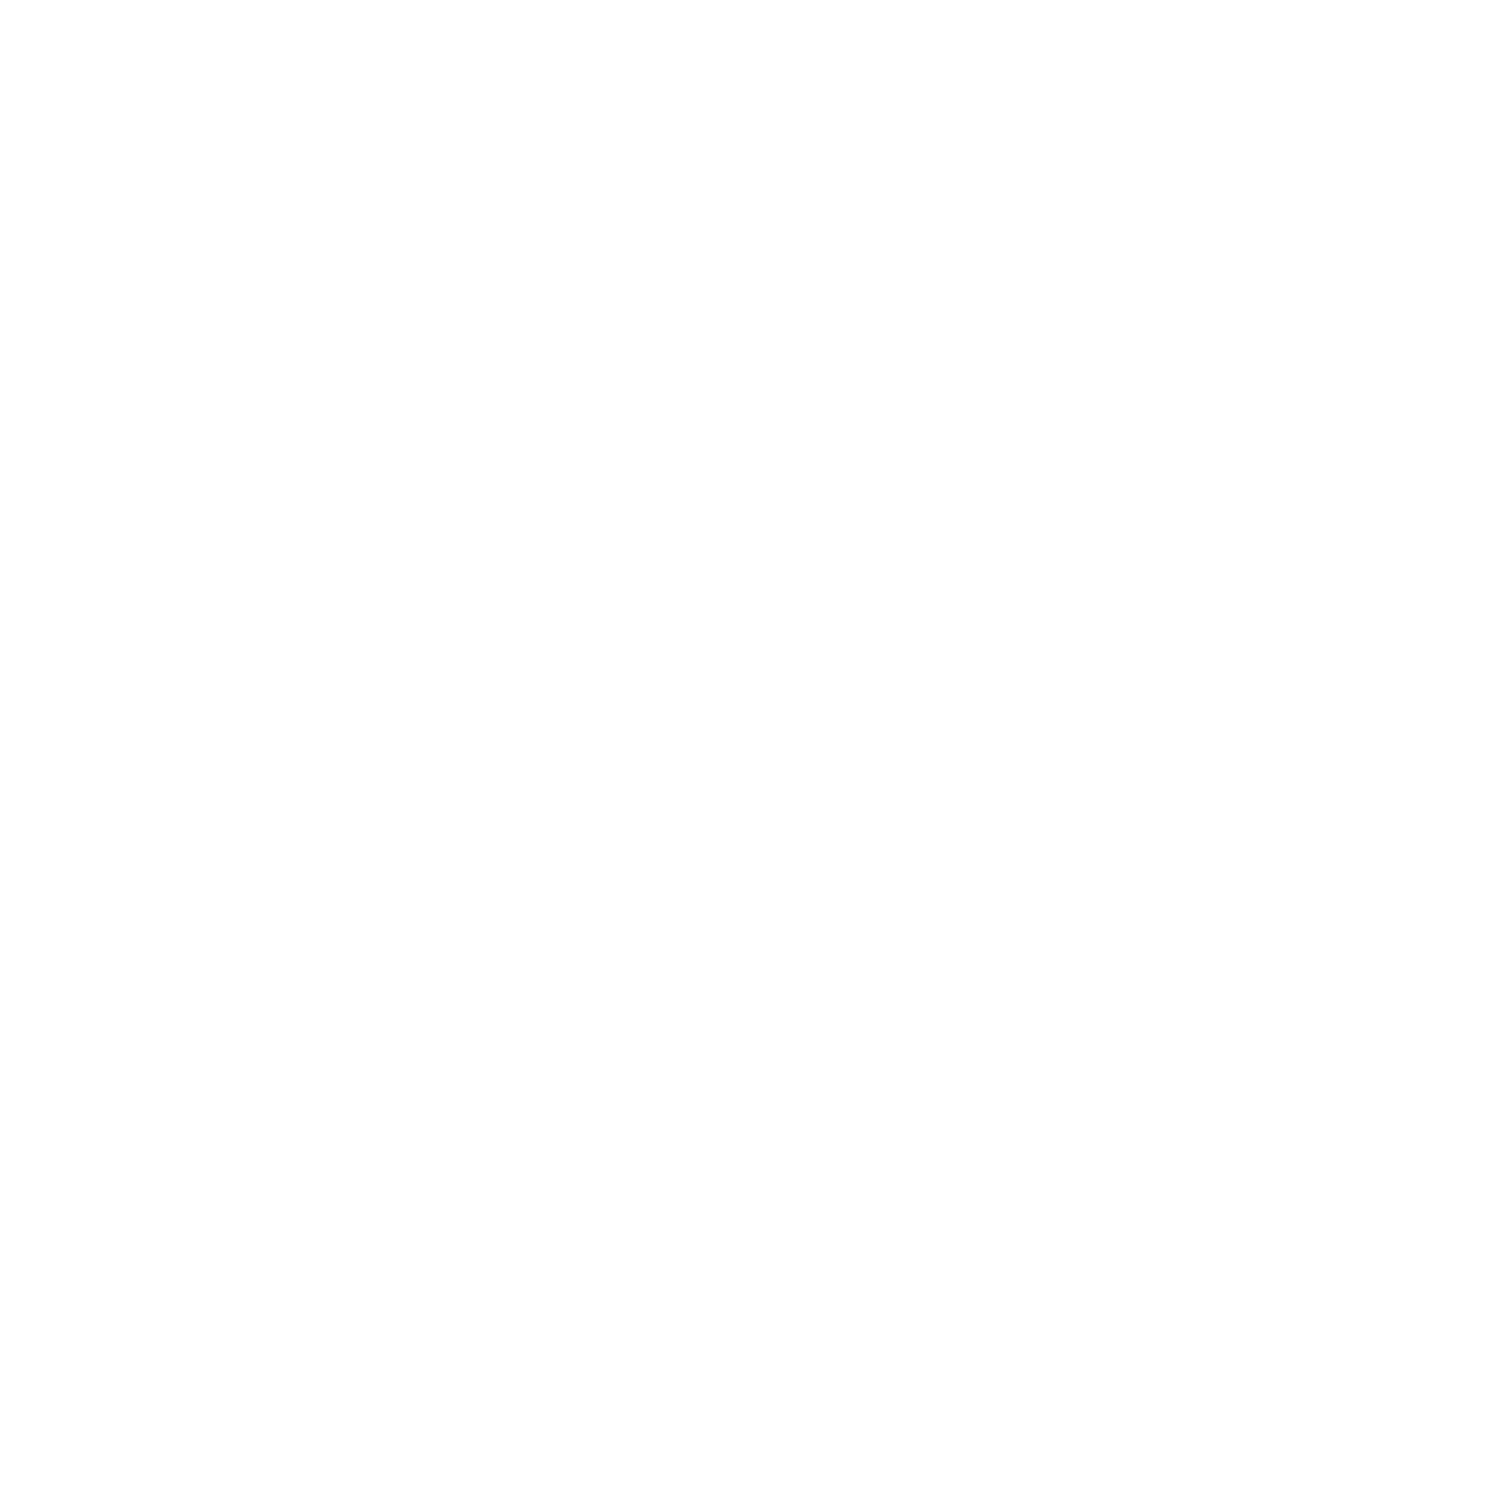 Kids in Need